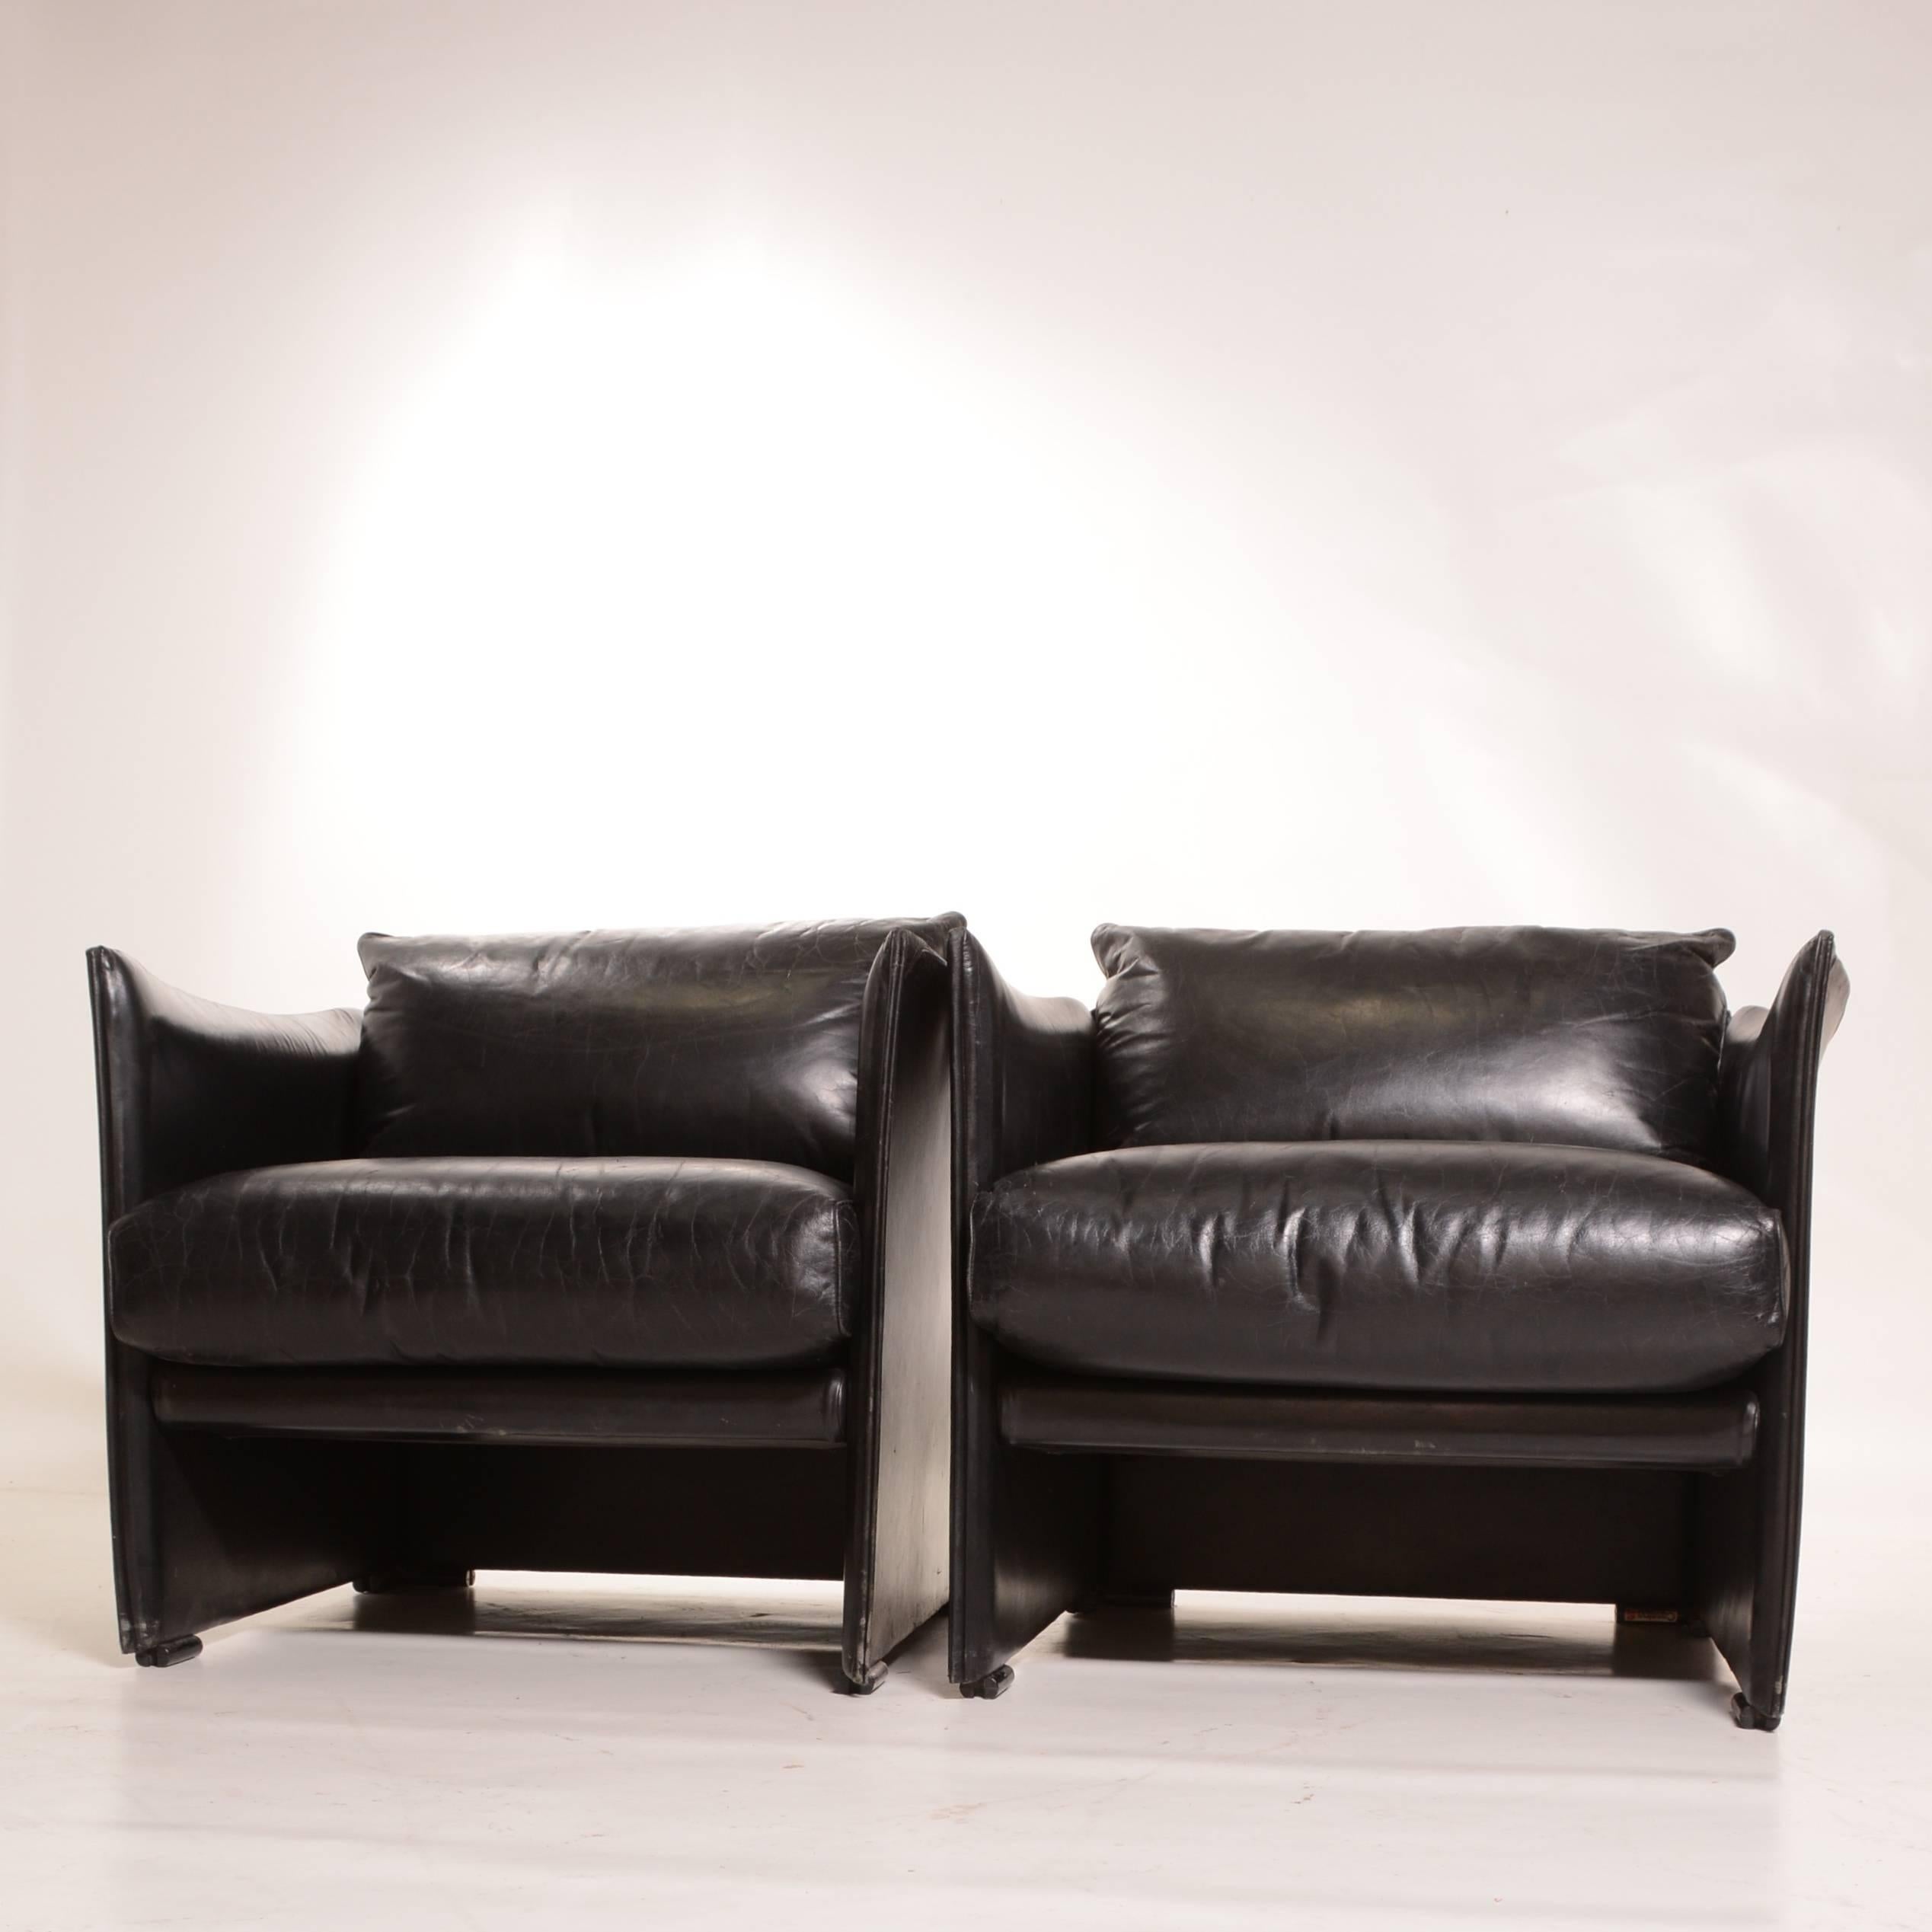 Italian Pair of Black Leather Armchairs by Vico Magistretti for Cassina